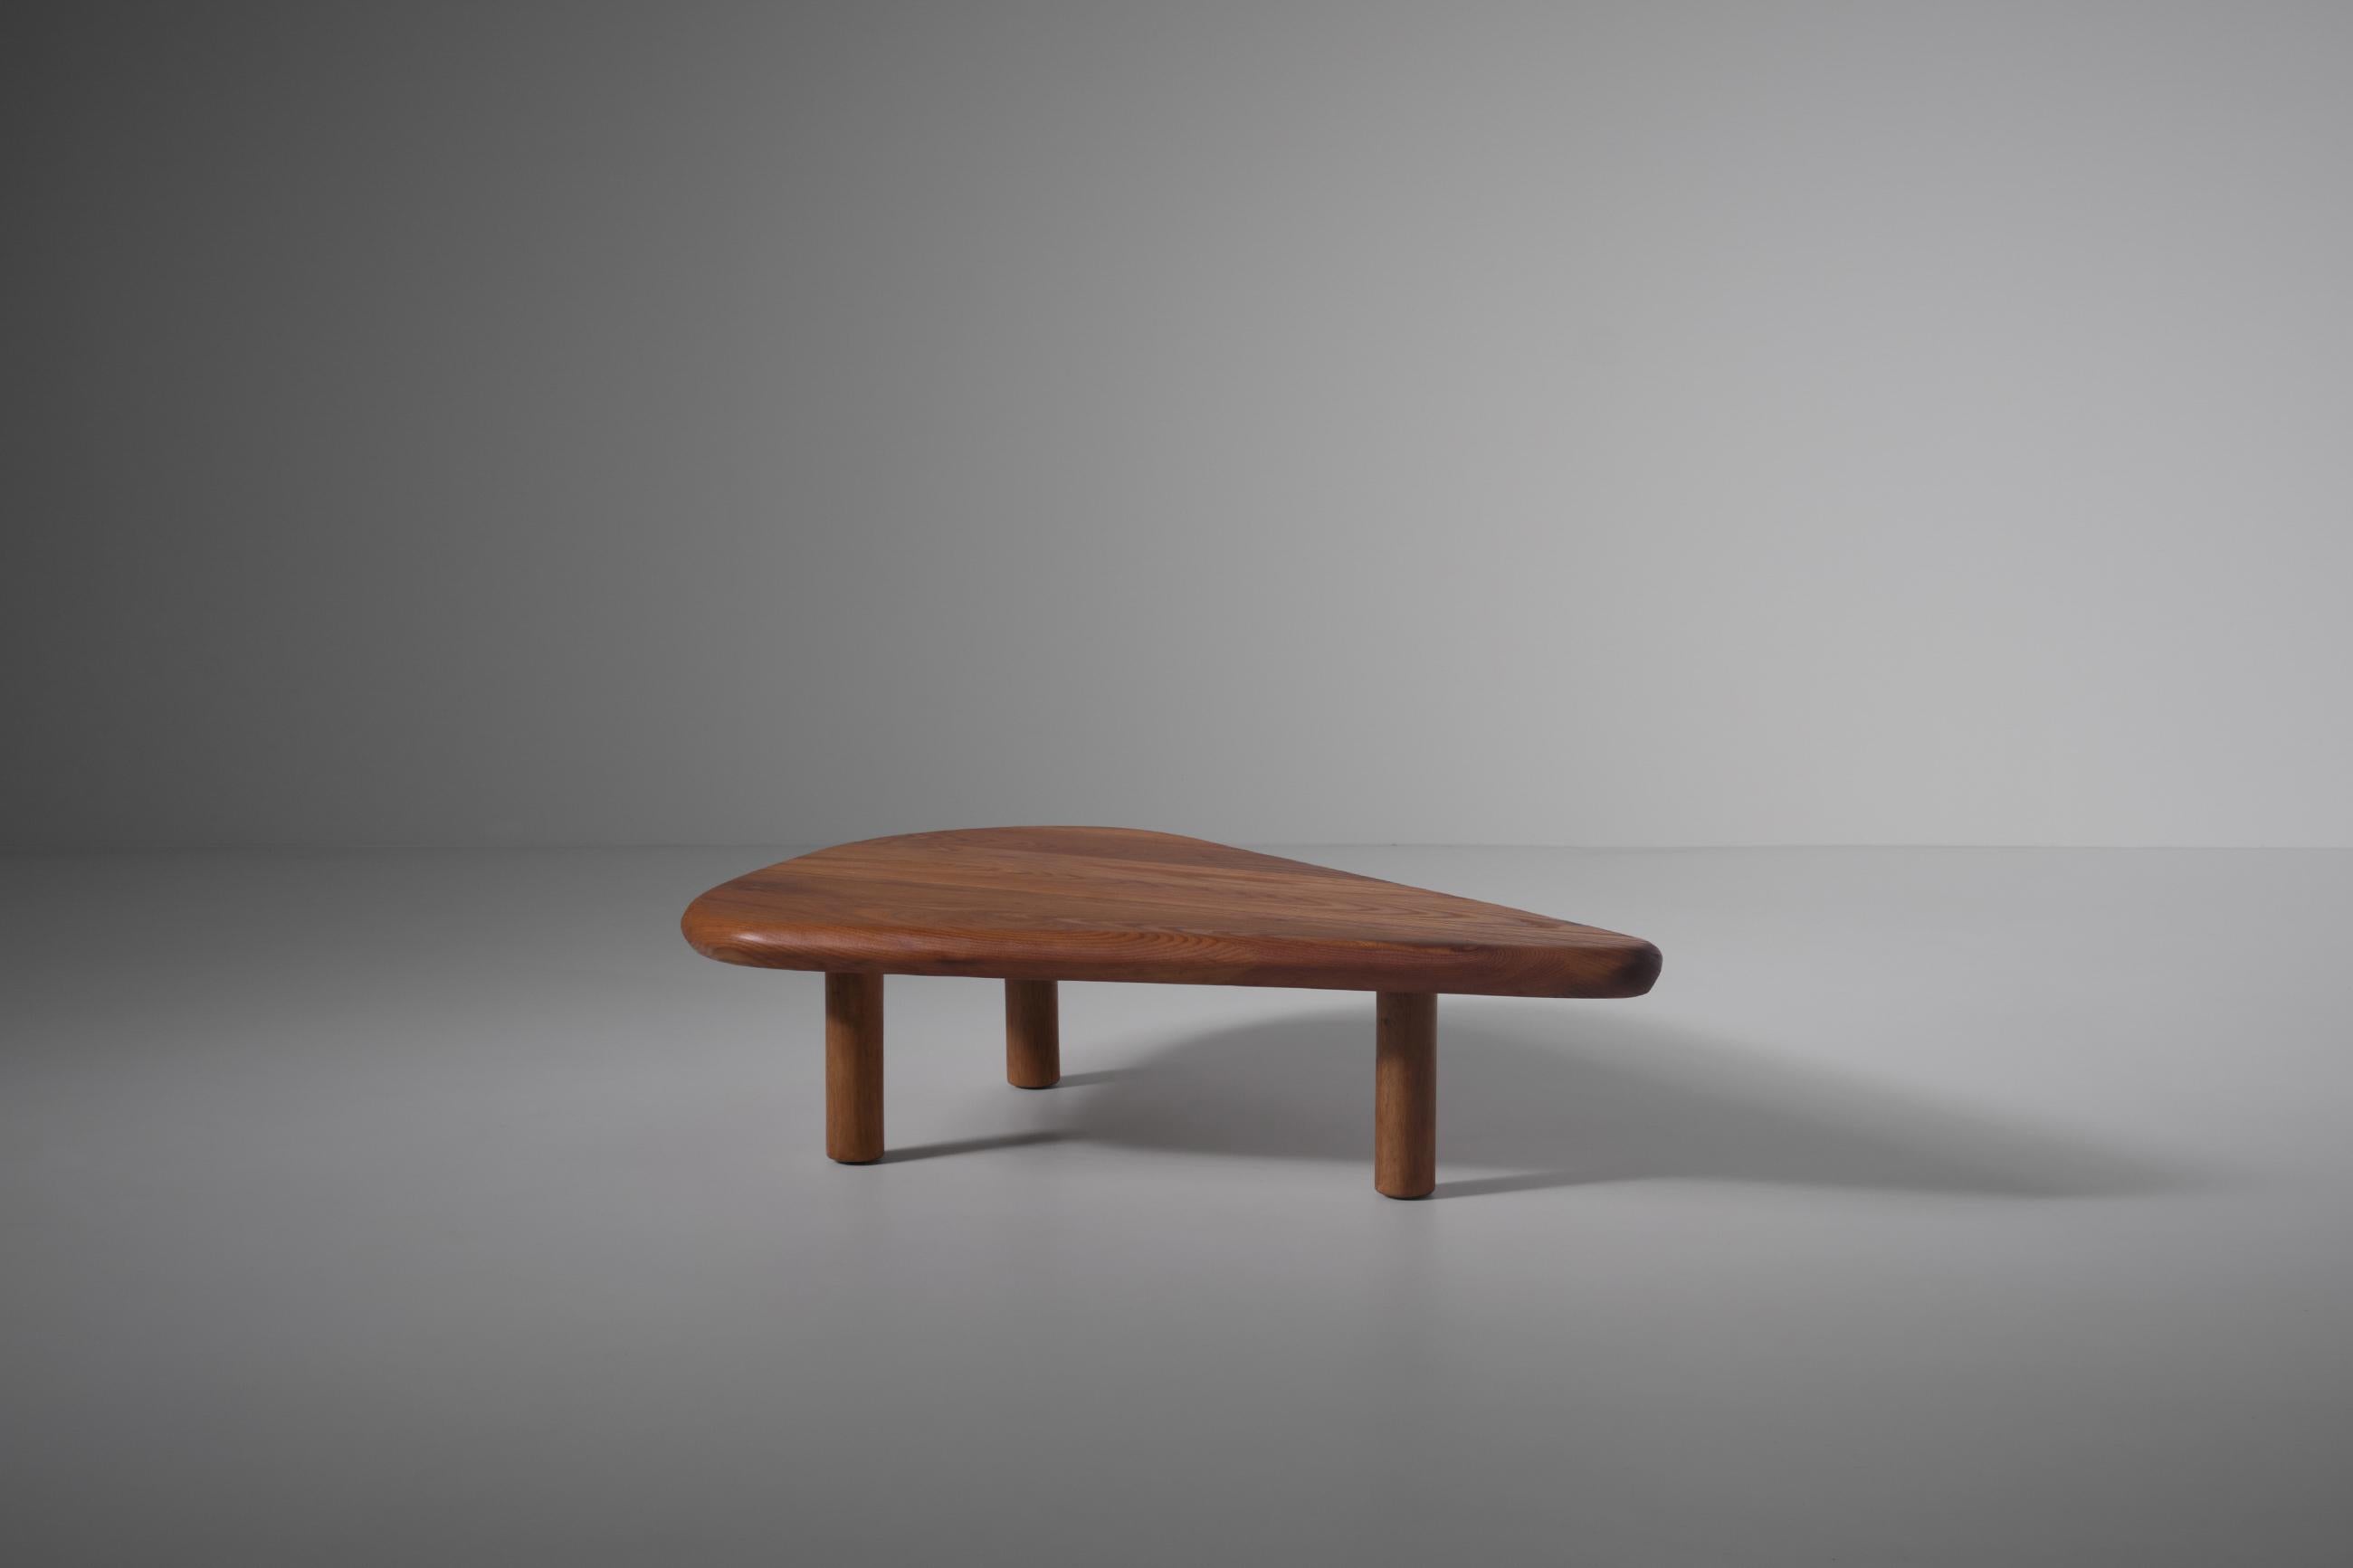 Solid Elm coffee table, France 1970s. Beautiful floating free form top made in solid warm colored Elm wood with a beautiful exposed grain. The 5,5 cm thick solid top has a nicely shaped edge and stand on three cylindrical legs, giving it almost a